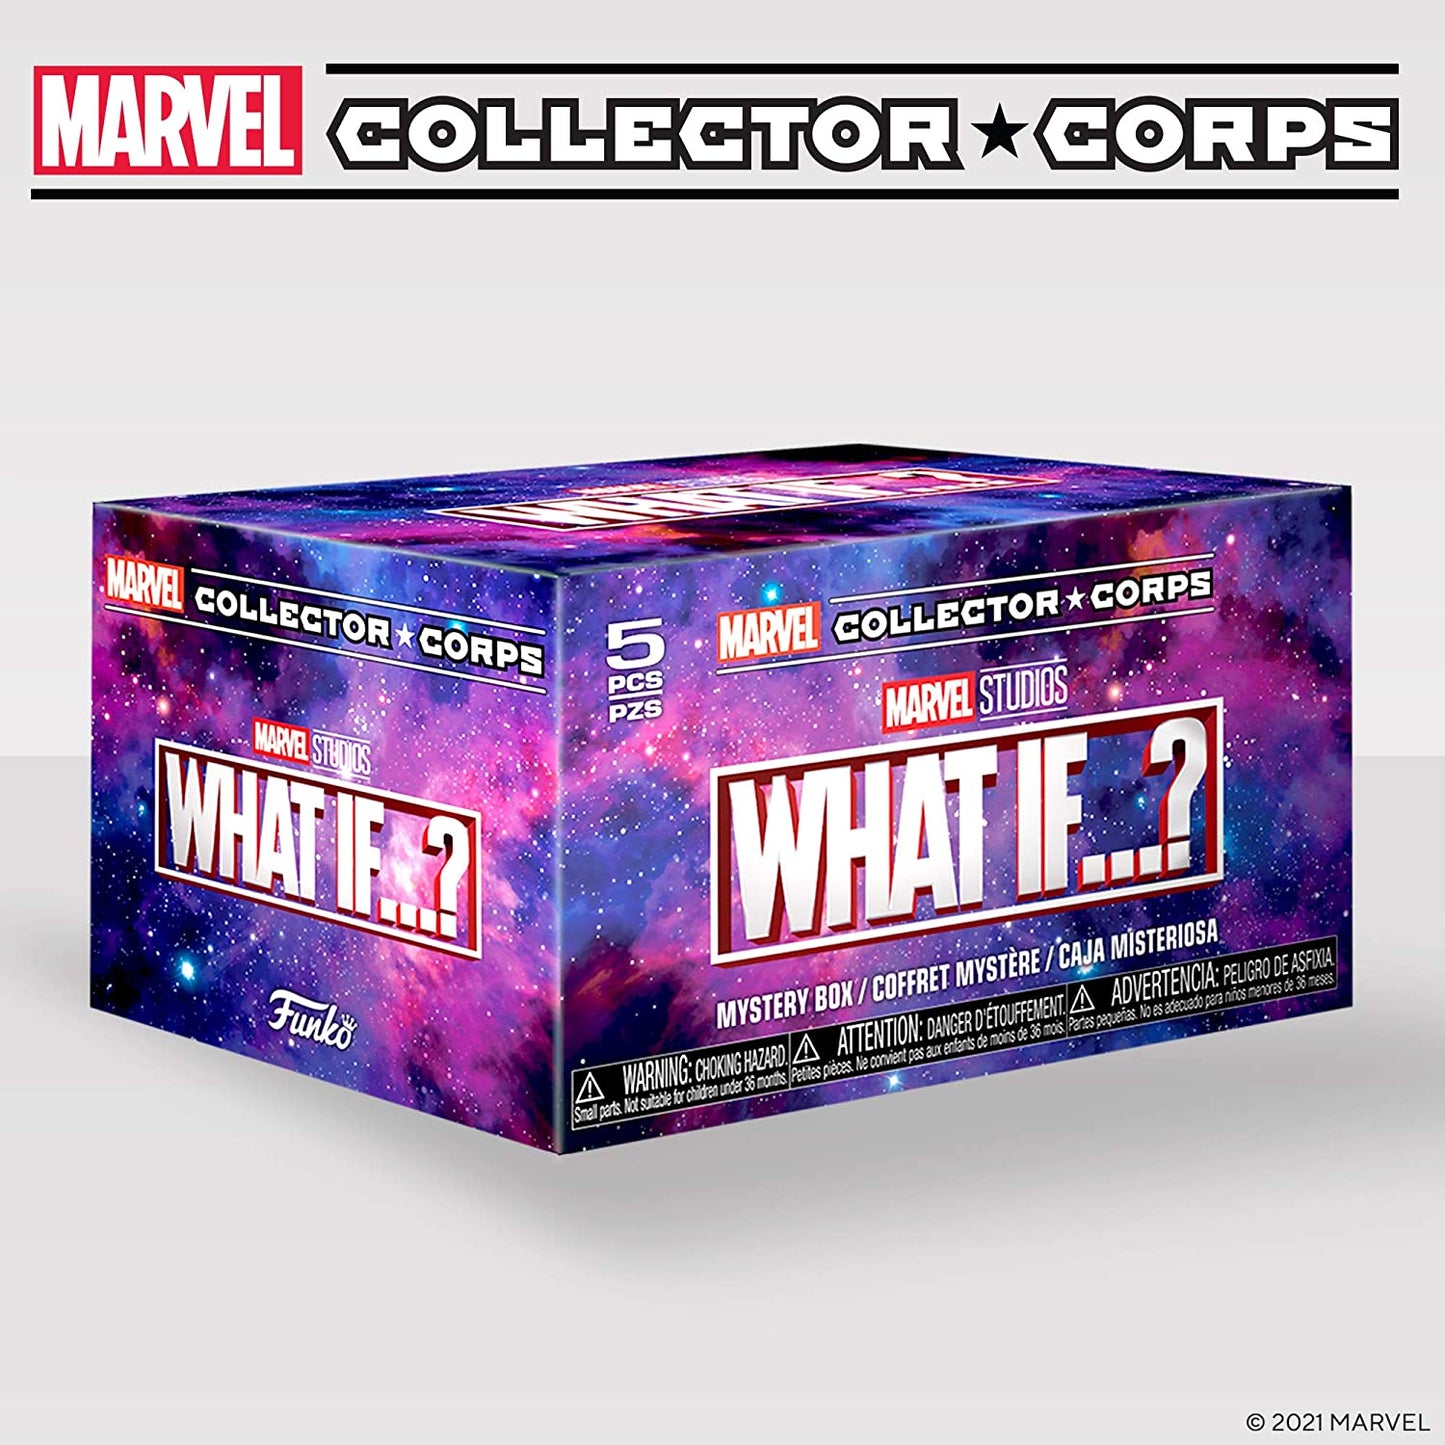 Marvel Collector Corps What if...? Talla L